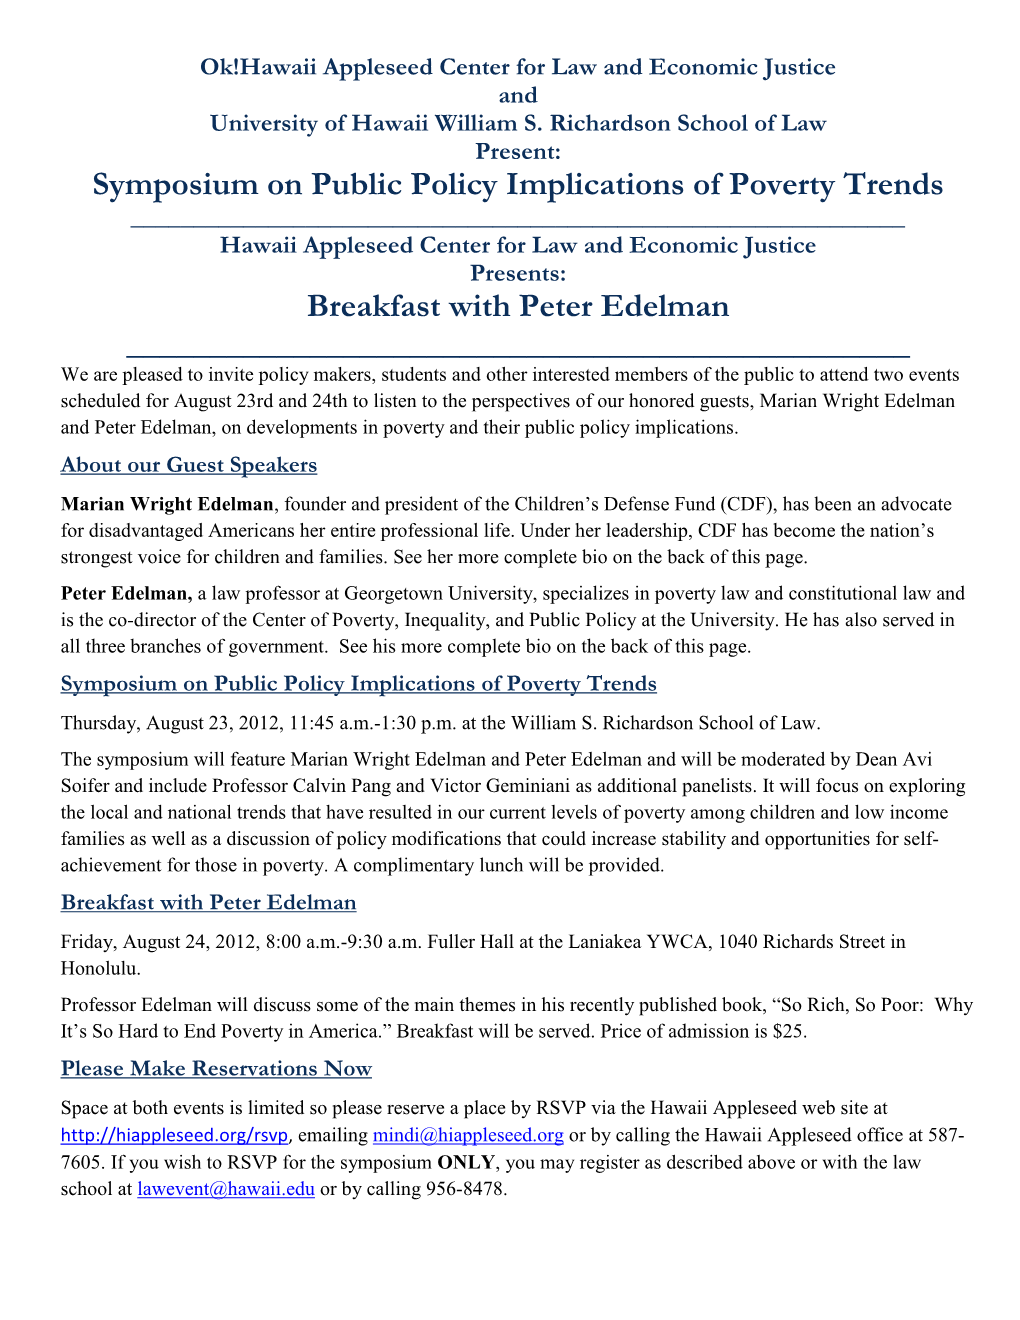 Symposium on Public Policy Implications of Poverty Trends